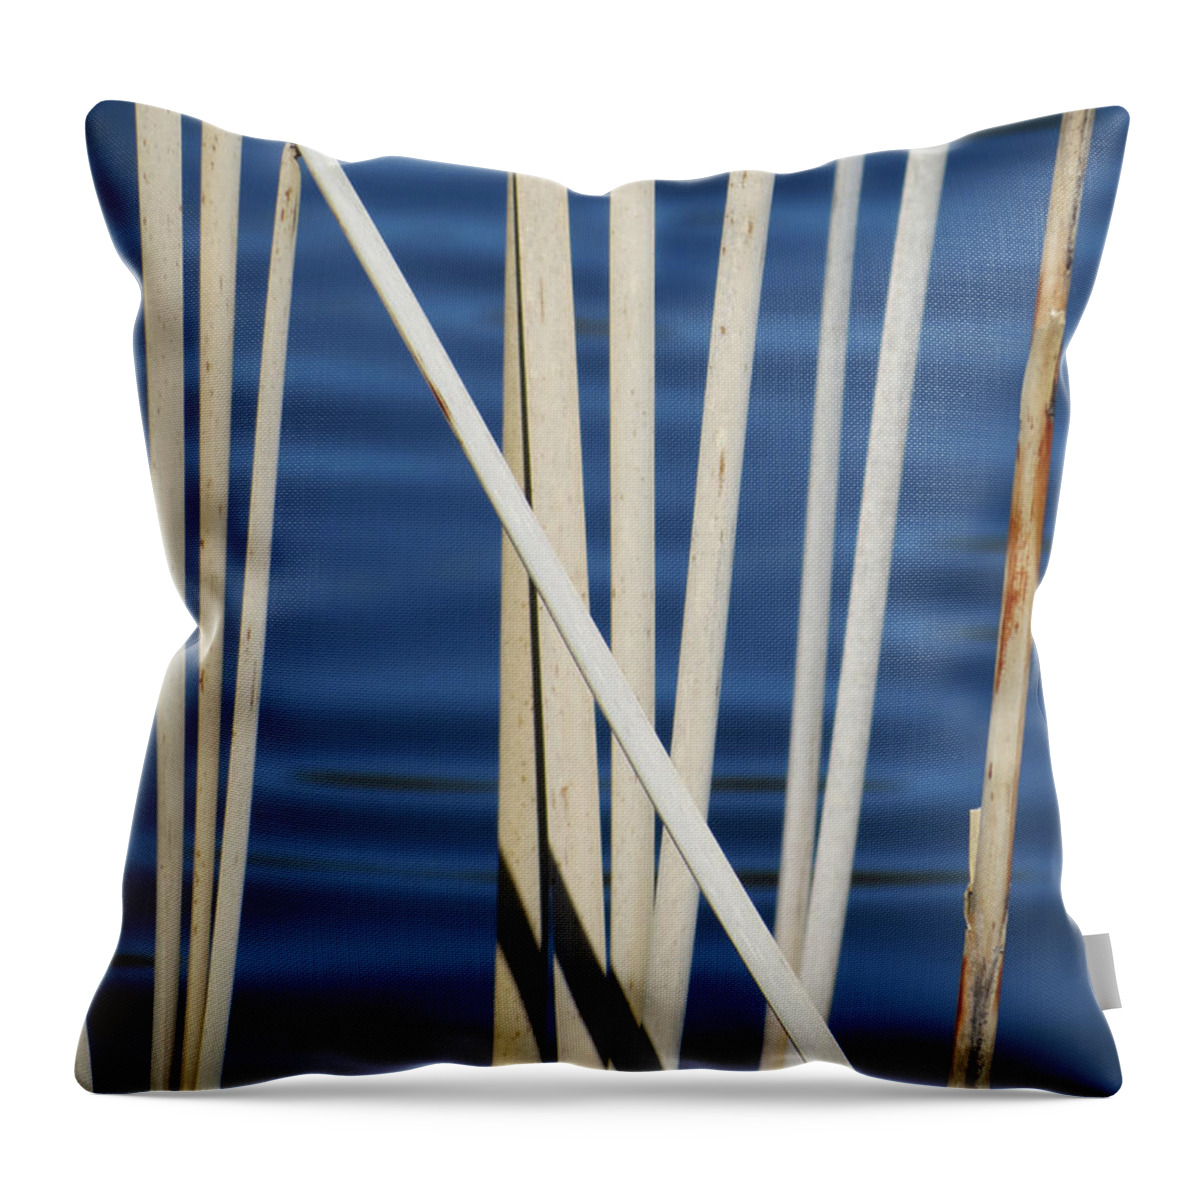 Water Throw Pillow featuring the photograph Reeds by Azthet Photography